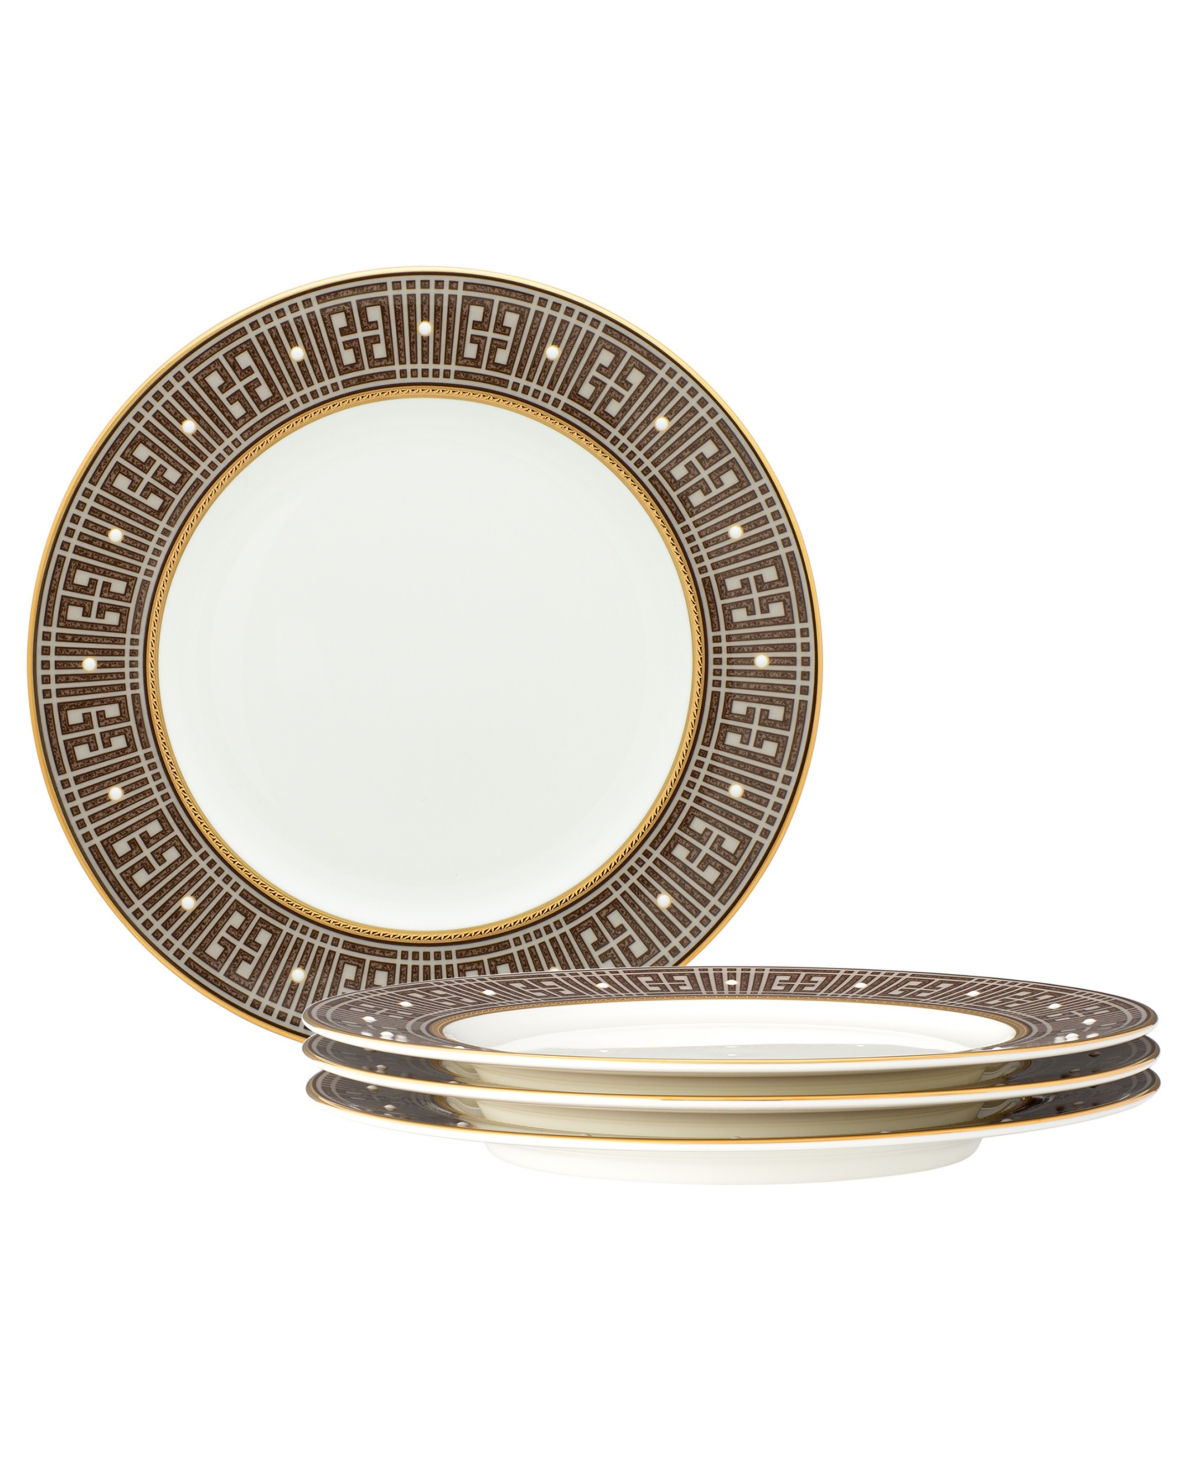 Noritake Infinity 4 Piece Salad Plate Set, Service For 4 In Bronze